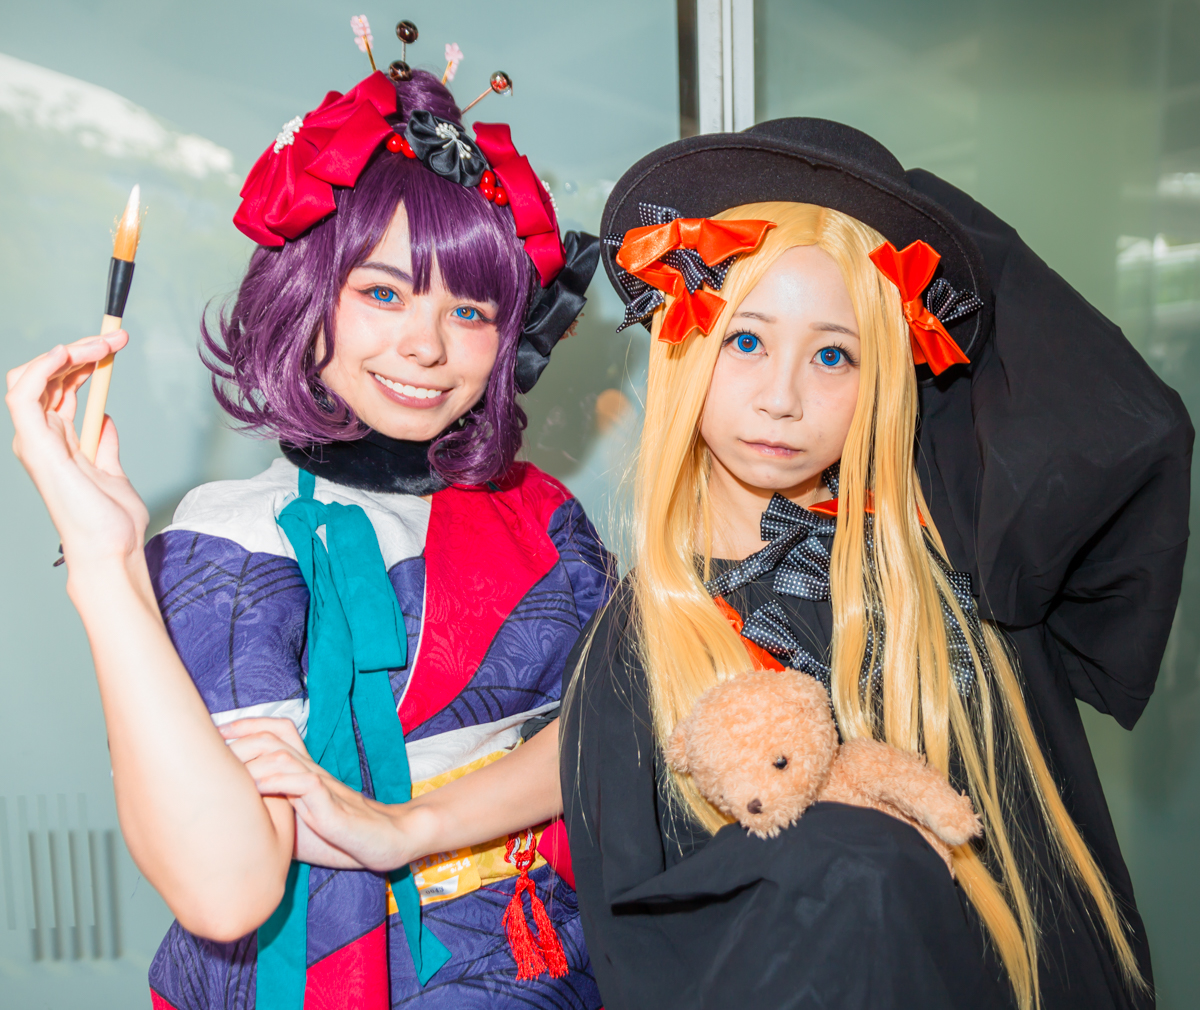 Will Japan Regulate Cosplay? Here’s What to Know